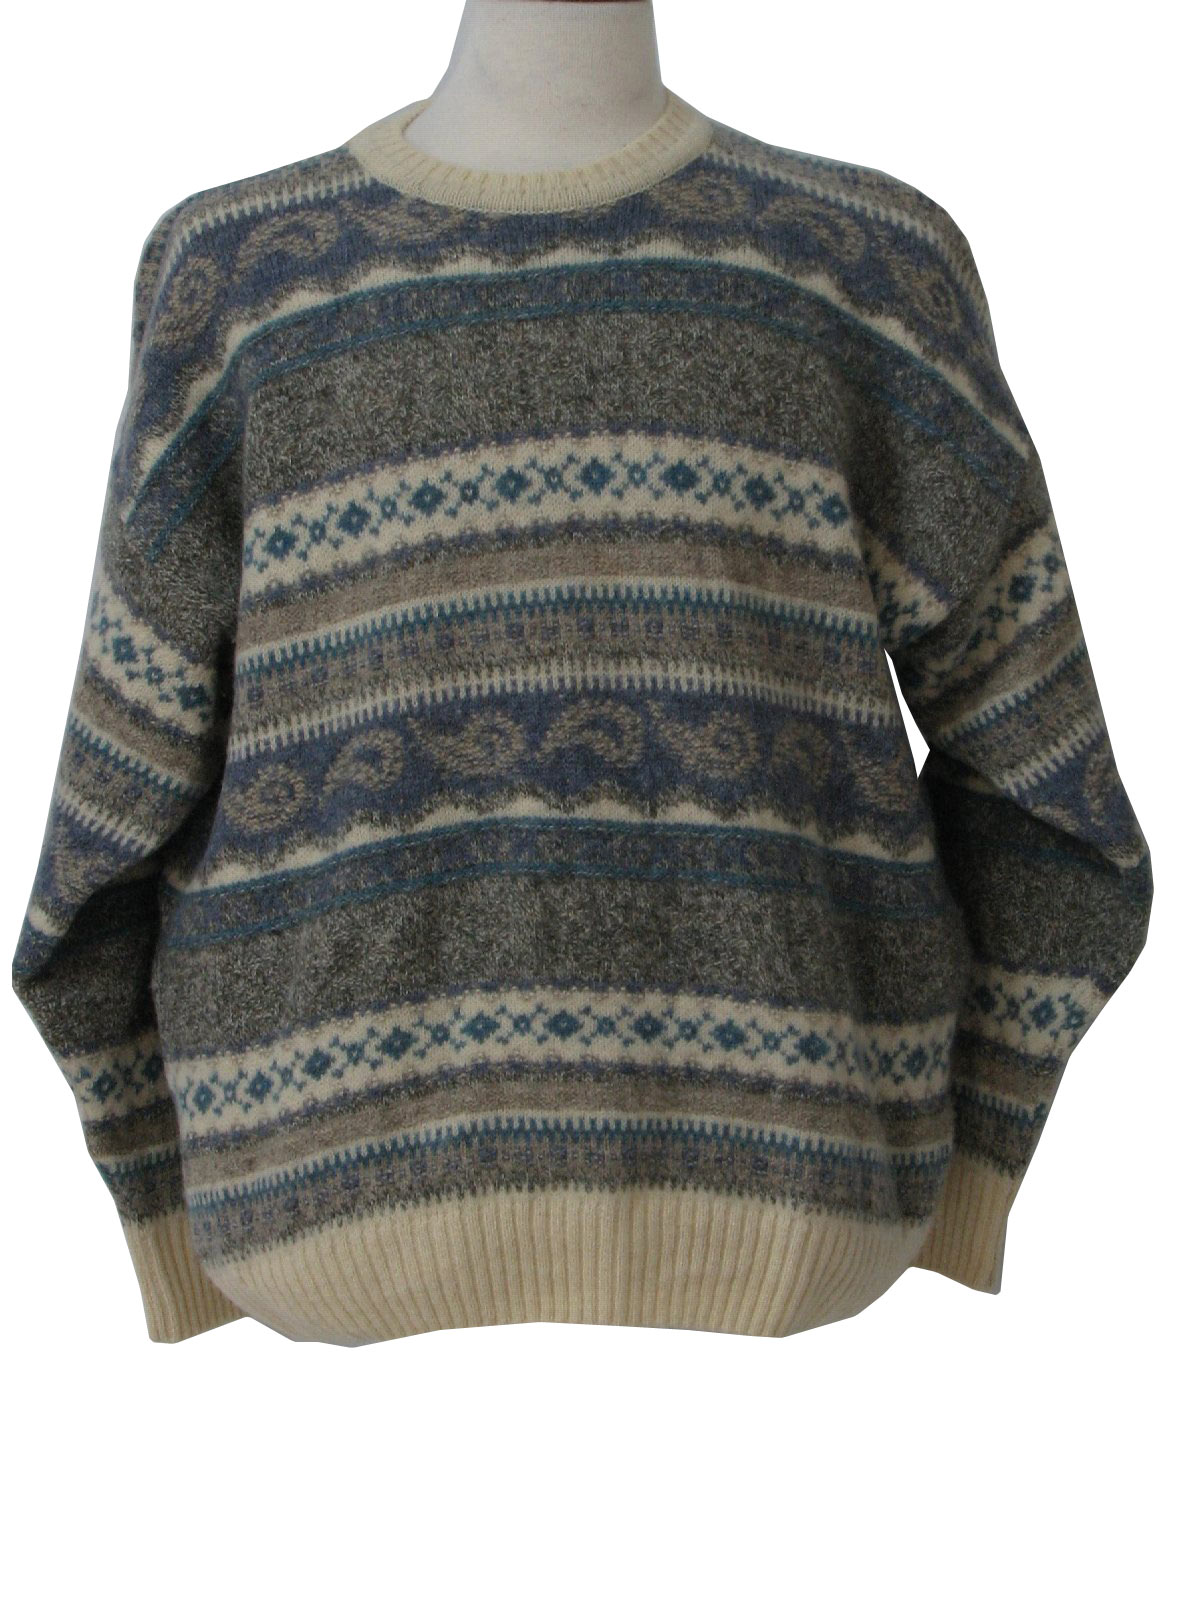 Vintage 80s Sweater: 80s -pitlochry- Mens shaded light blue, tan, white ...